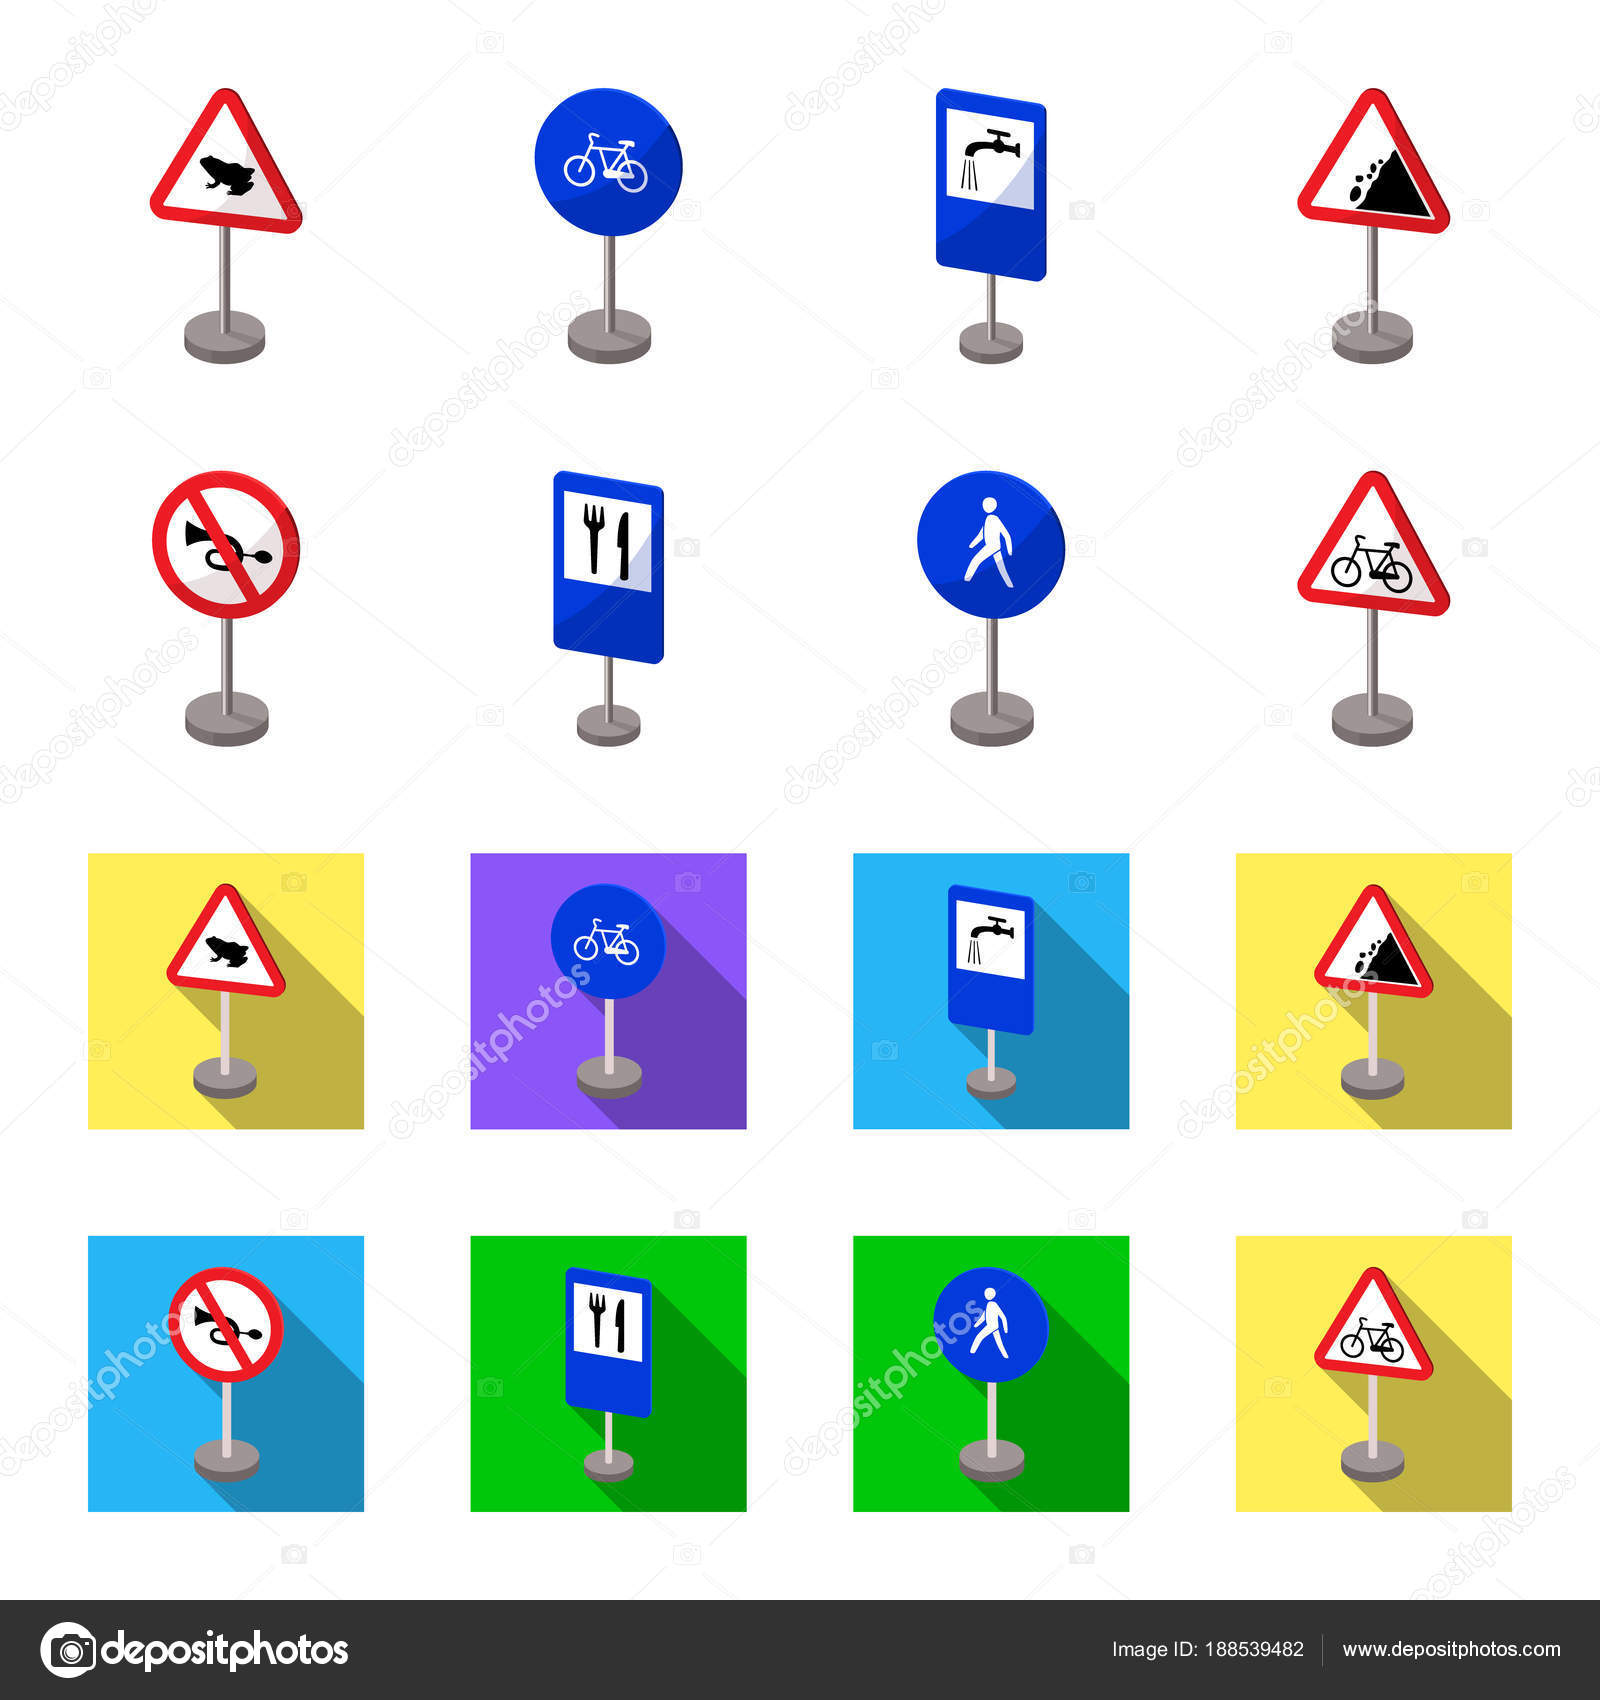 Different types of road signs cartoon,flat icons in set collection for ...